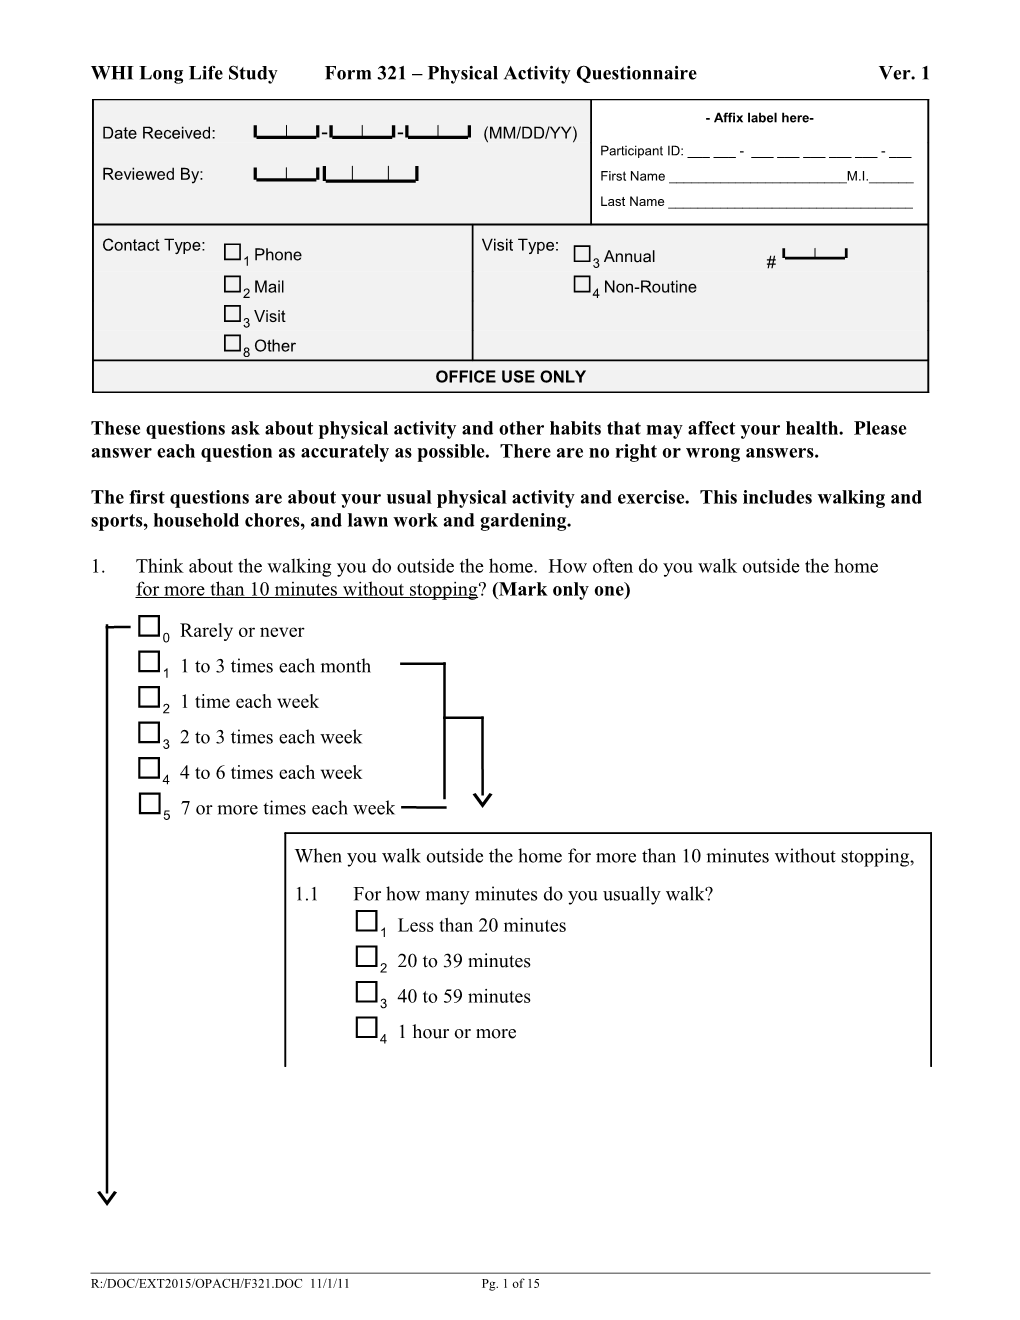 WHI Long Life Studyform 321 Physical Activity Questionnairever. 1